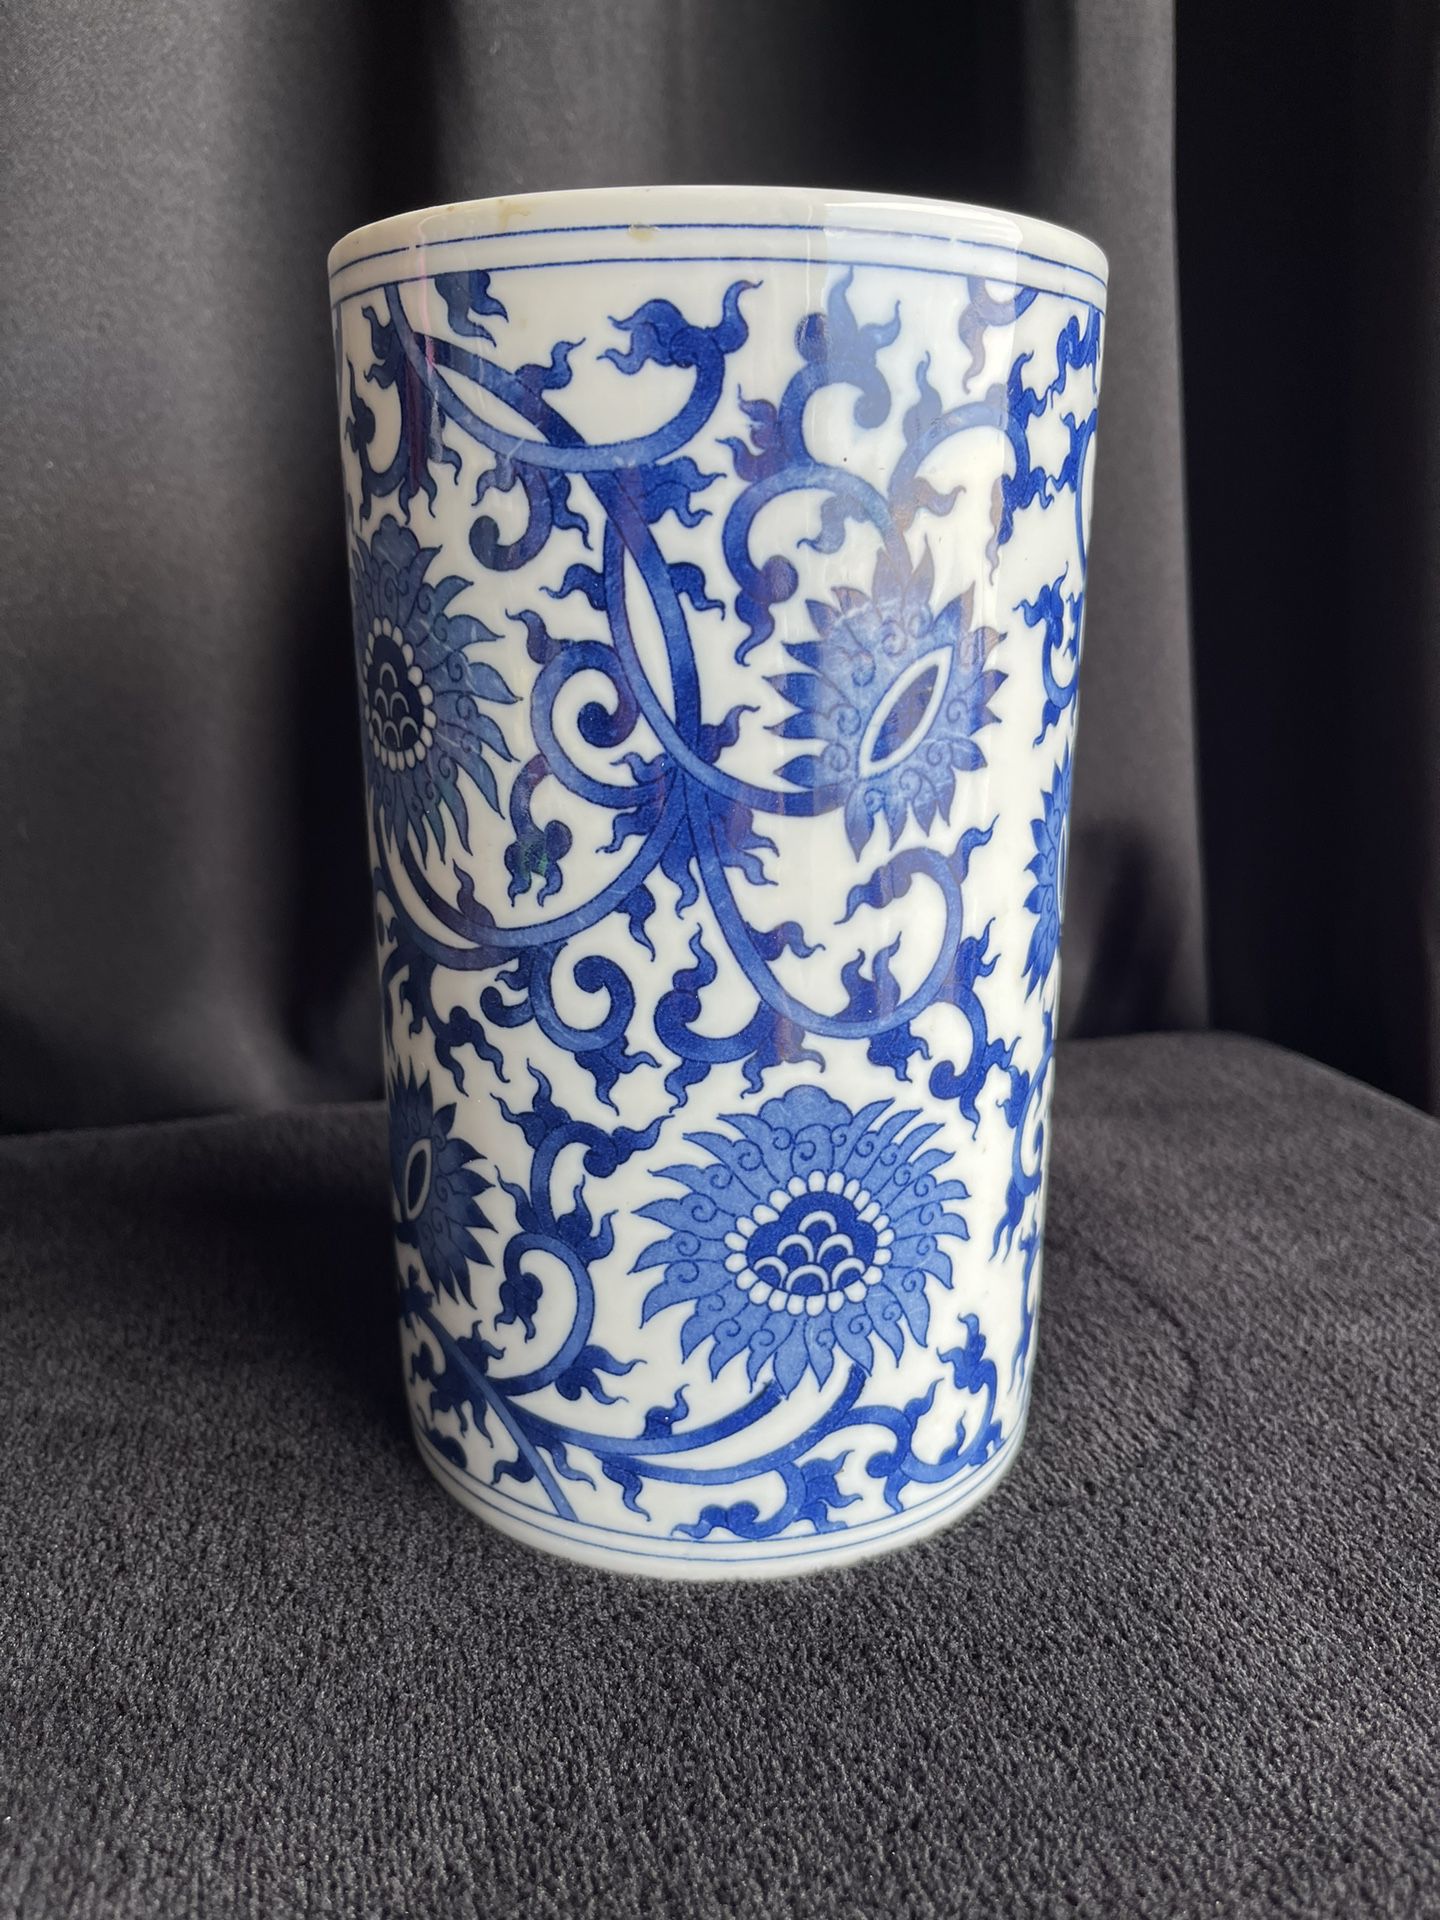 Vintage Chinese Blue And White Vase In Good Condition No Chips Or Anything 